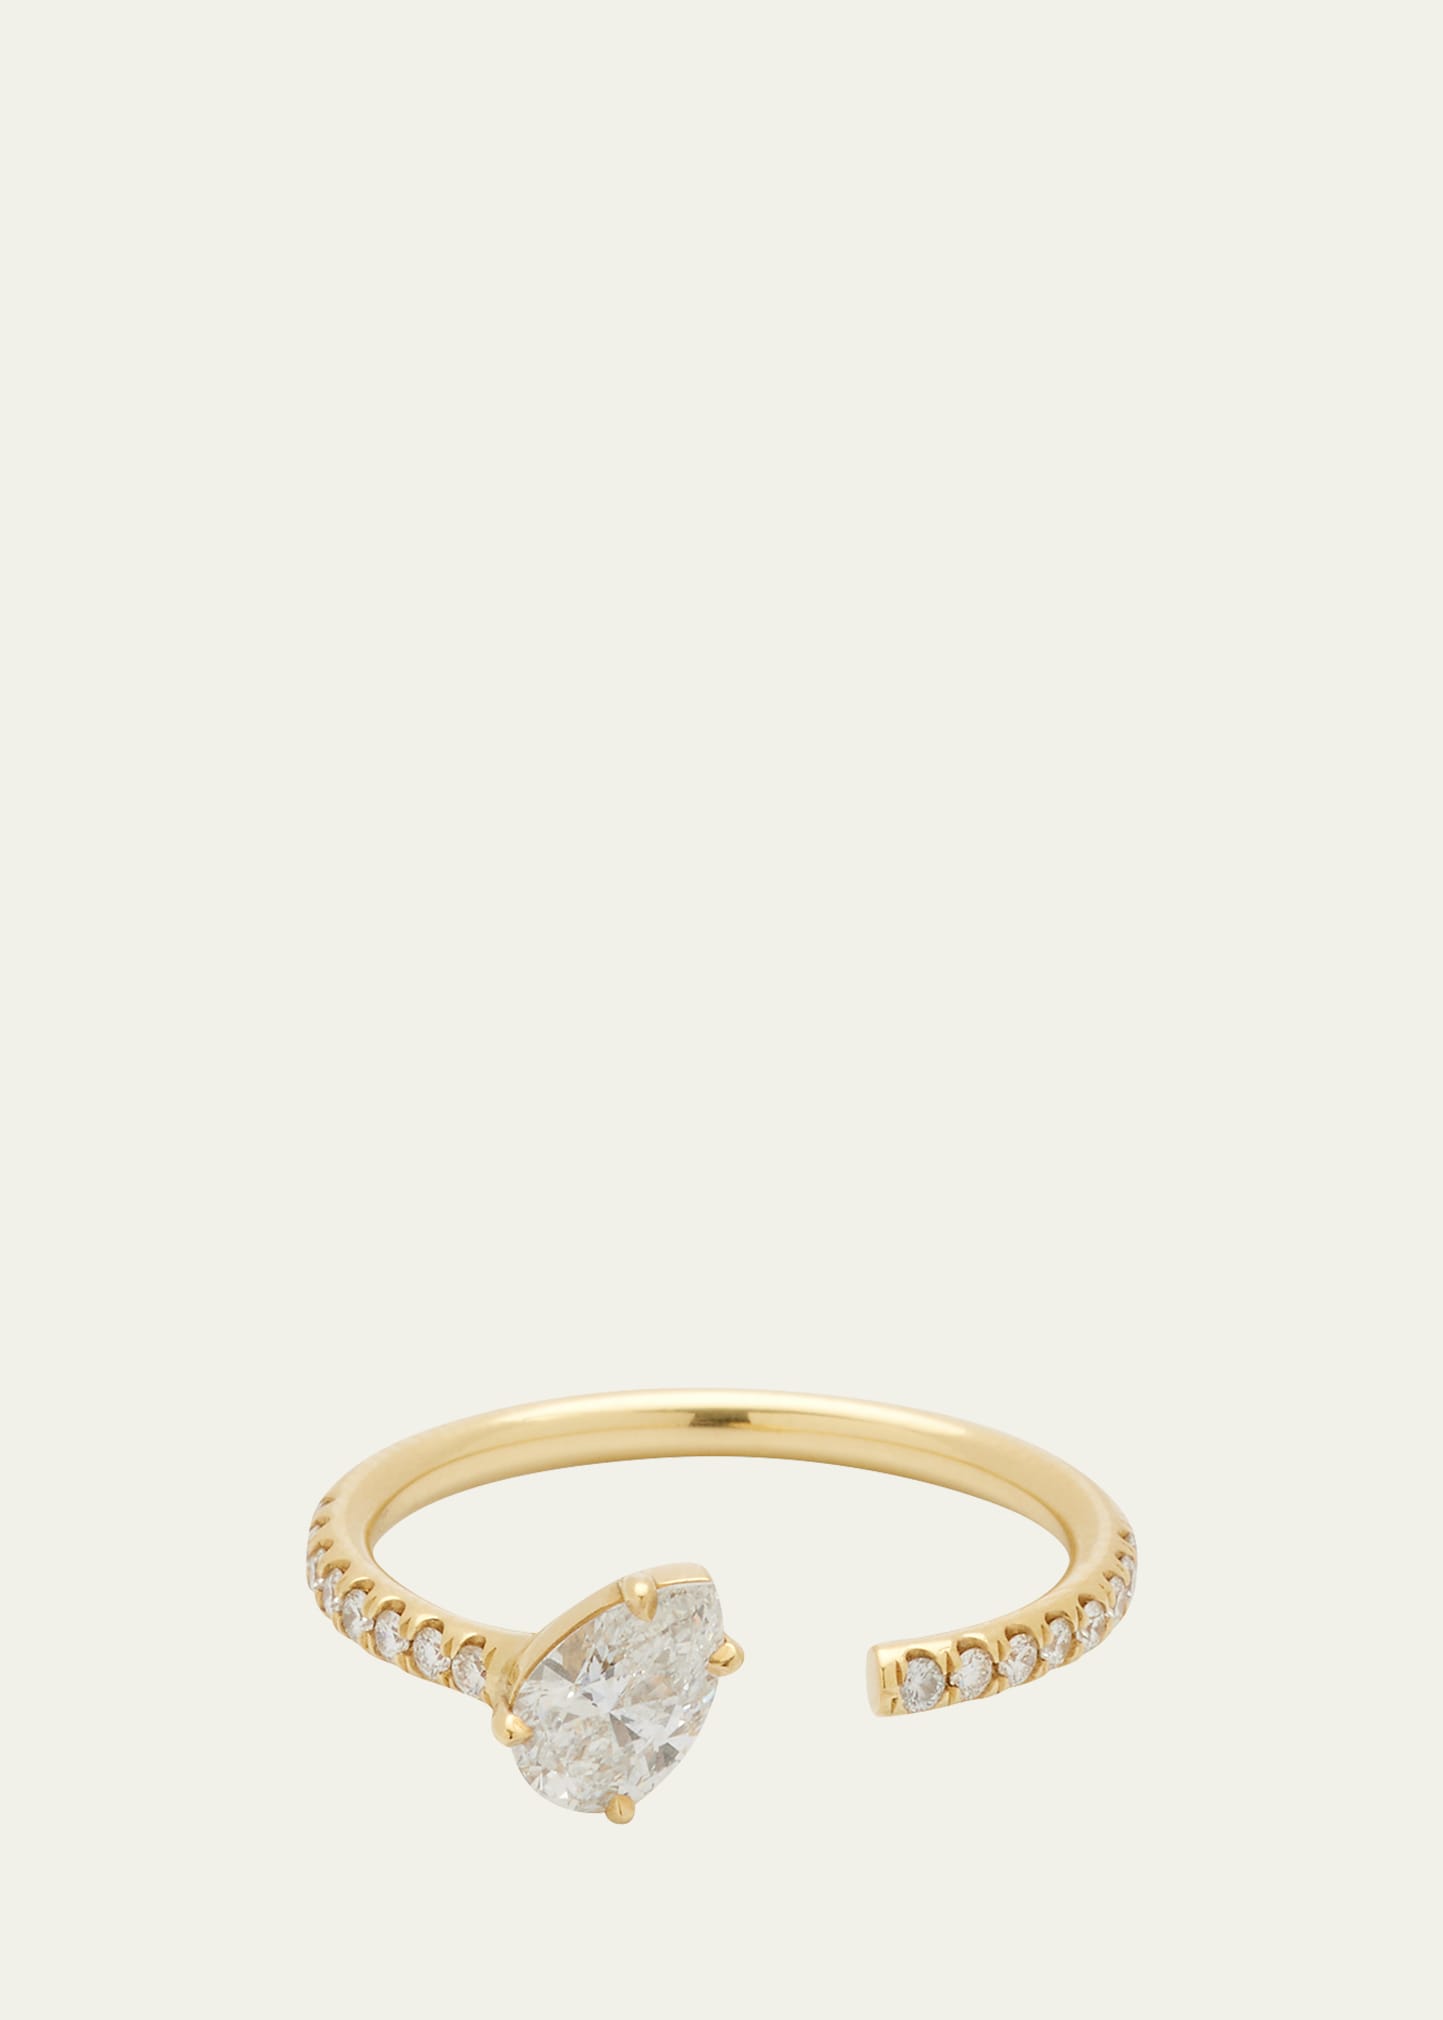 Jemma Wynne Prive Open Band Ring with Pear-Shaped Diamond